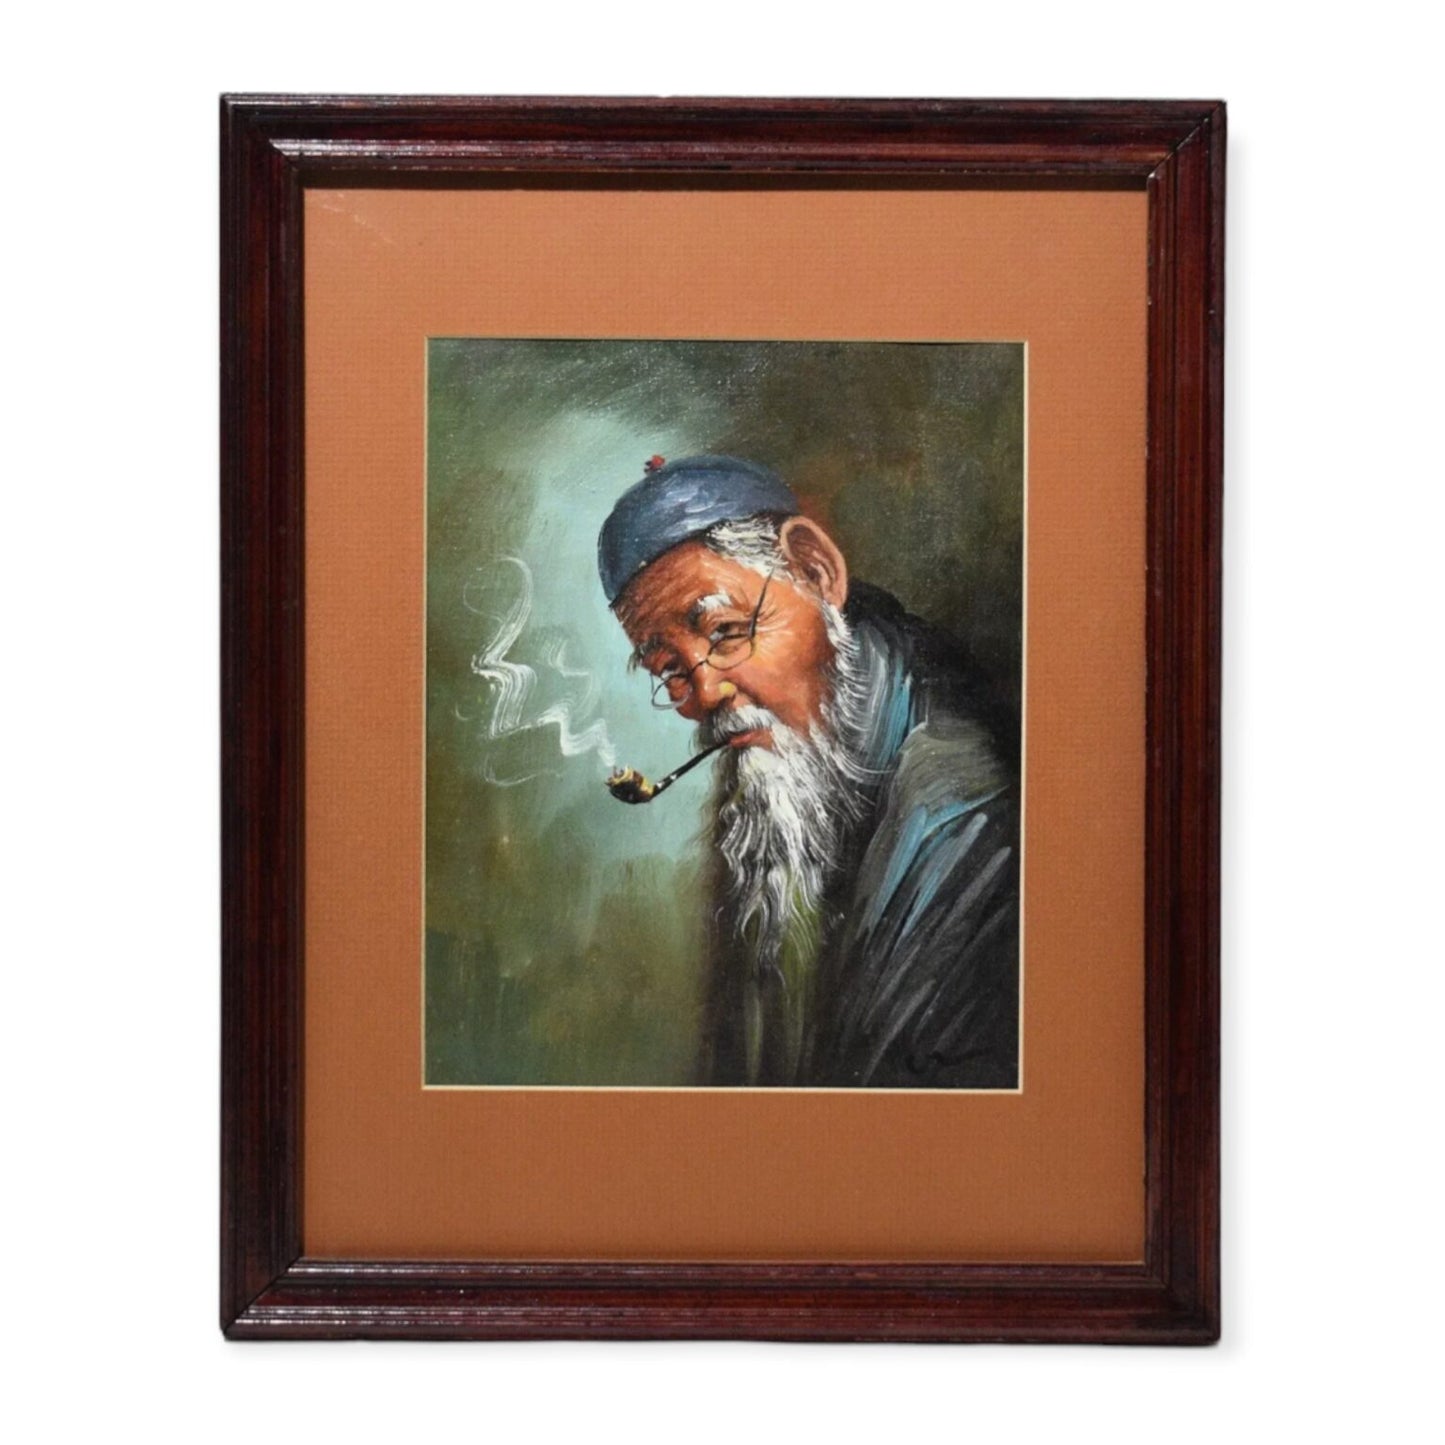 Mysterious Oil On Canvas "Asian Man Smoking Pipe"